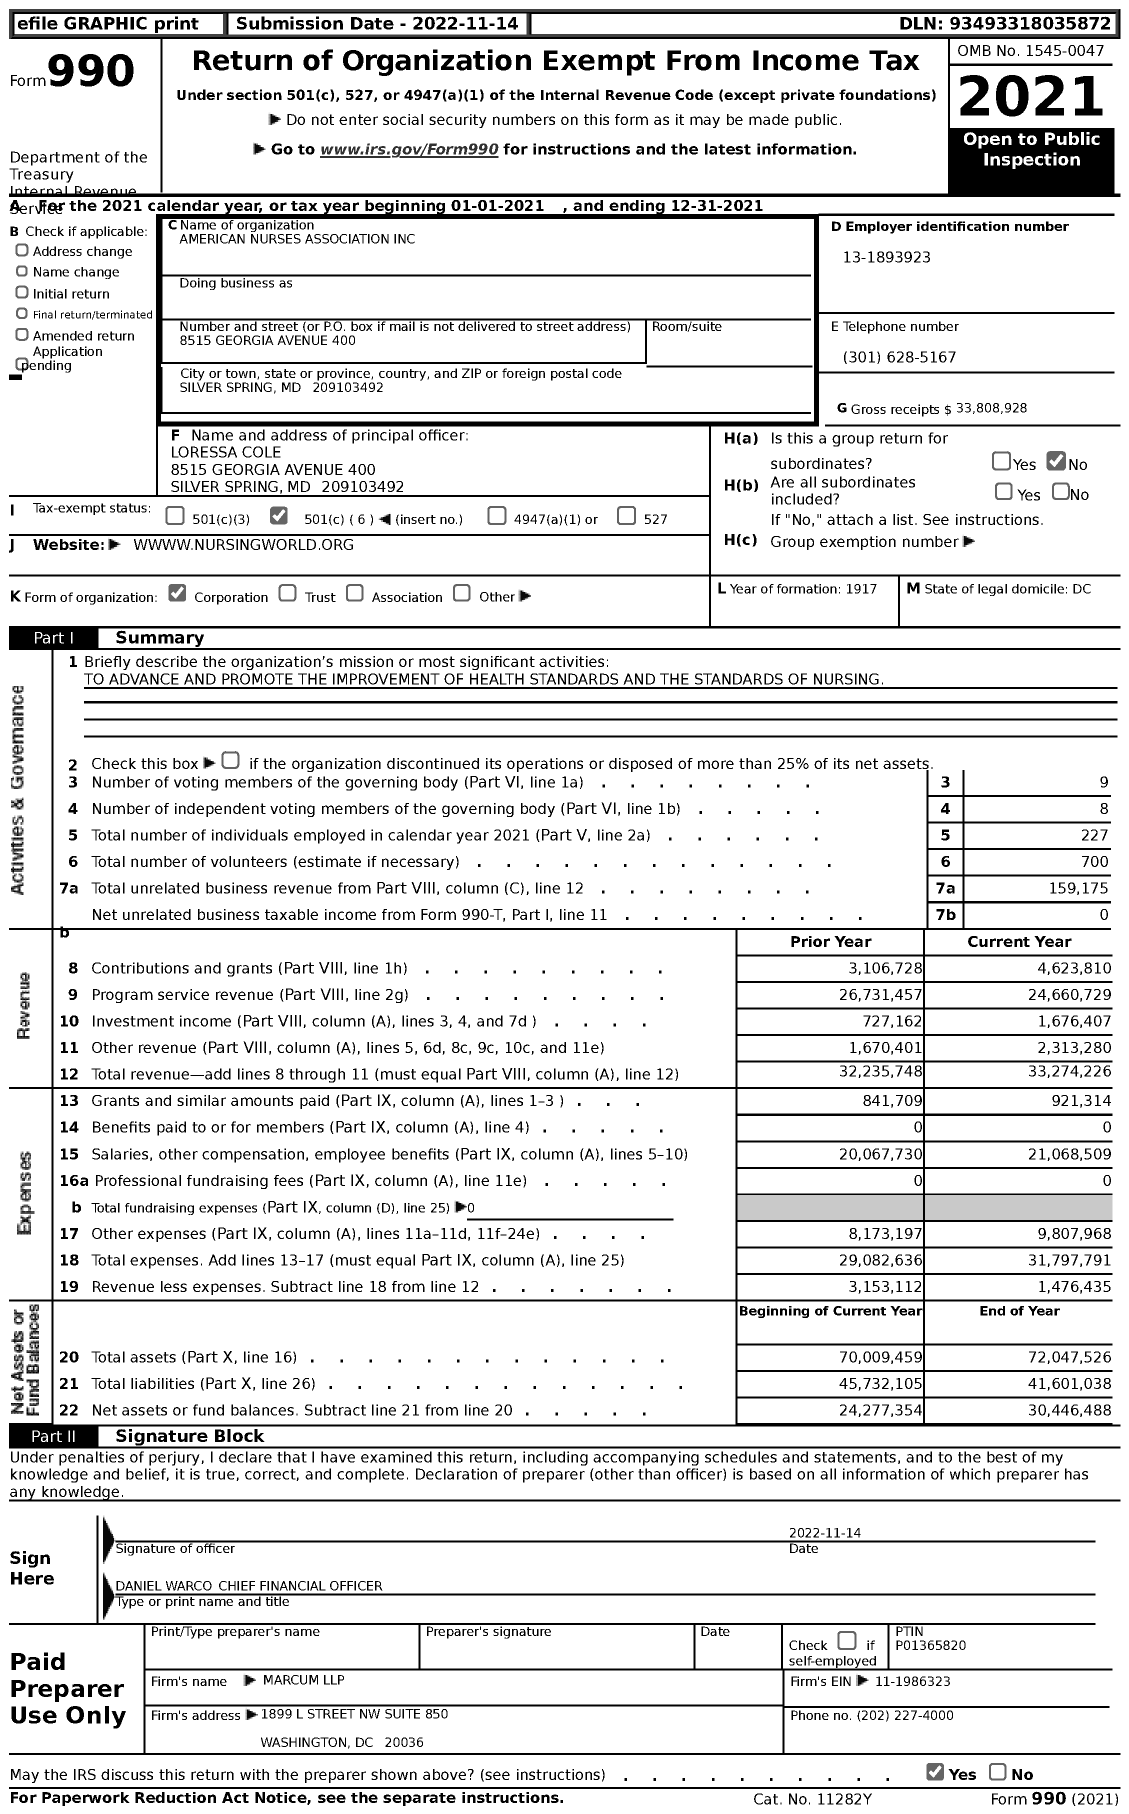 Image of first page of 2021 Form 990 for American Nurses Association (ANA)